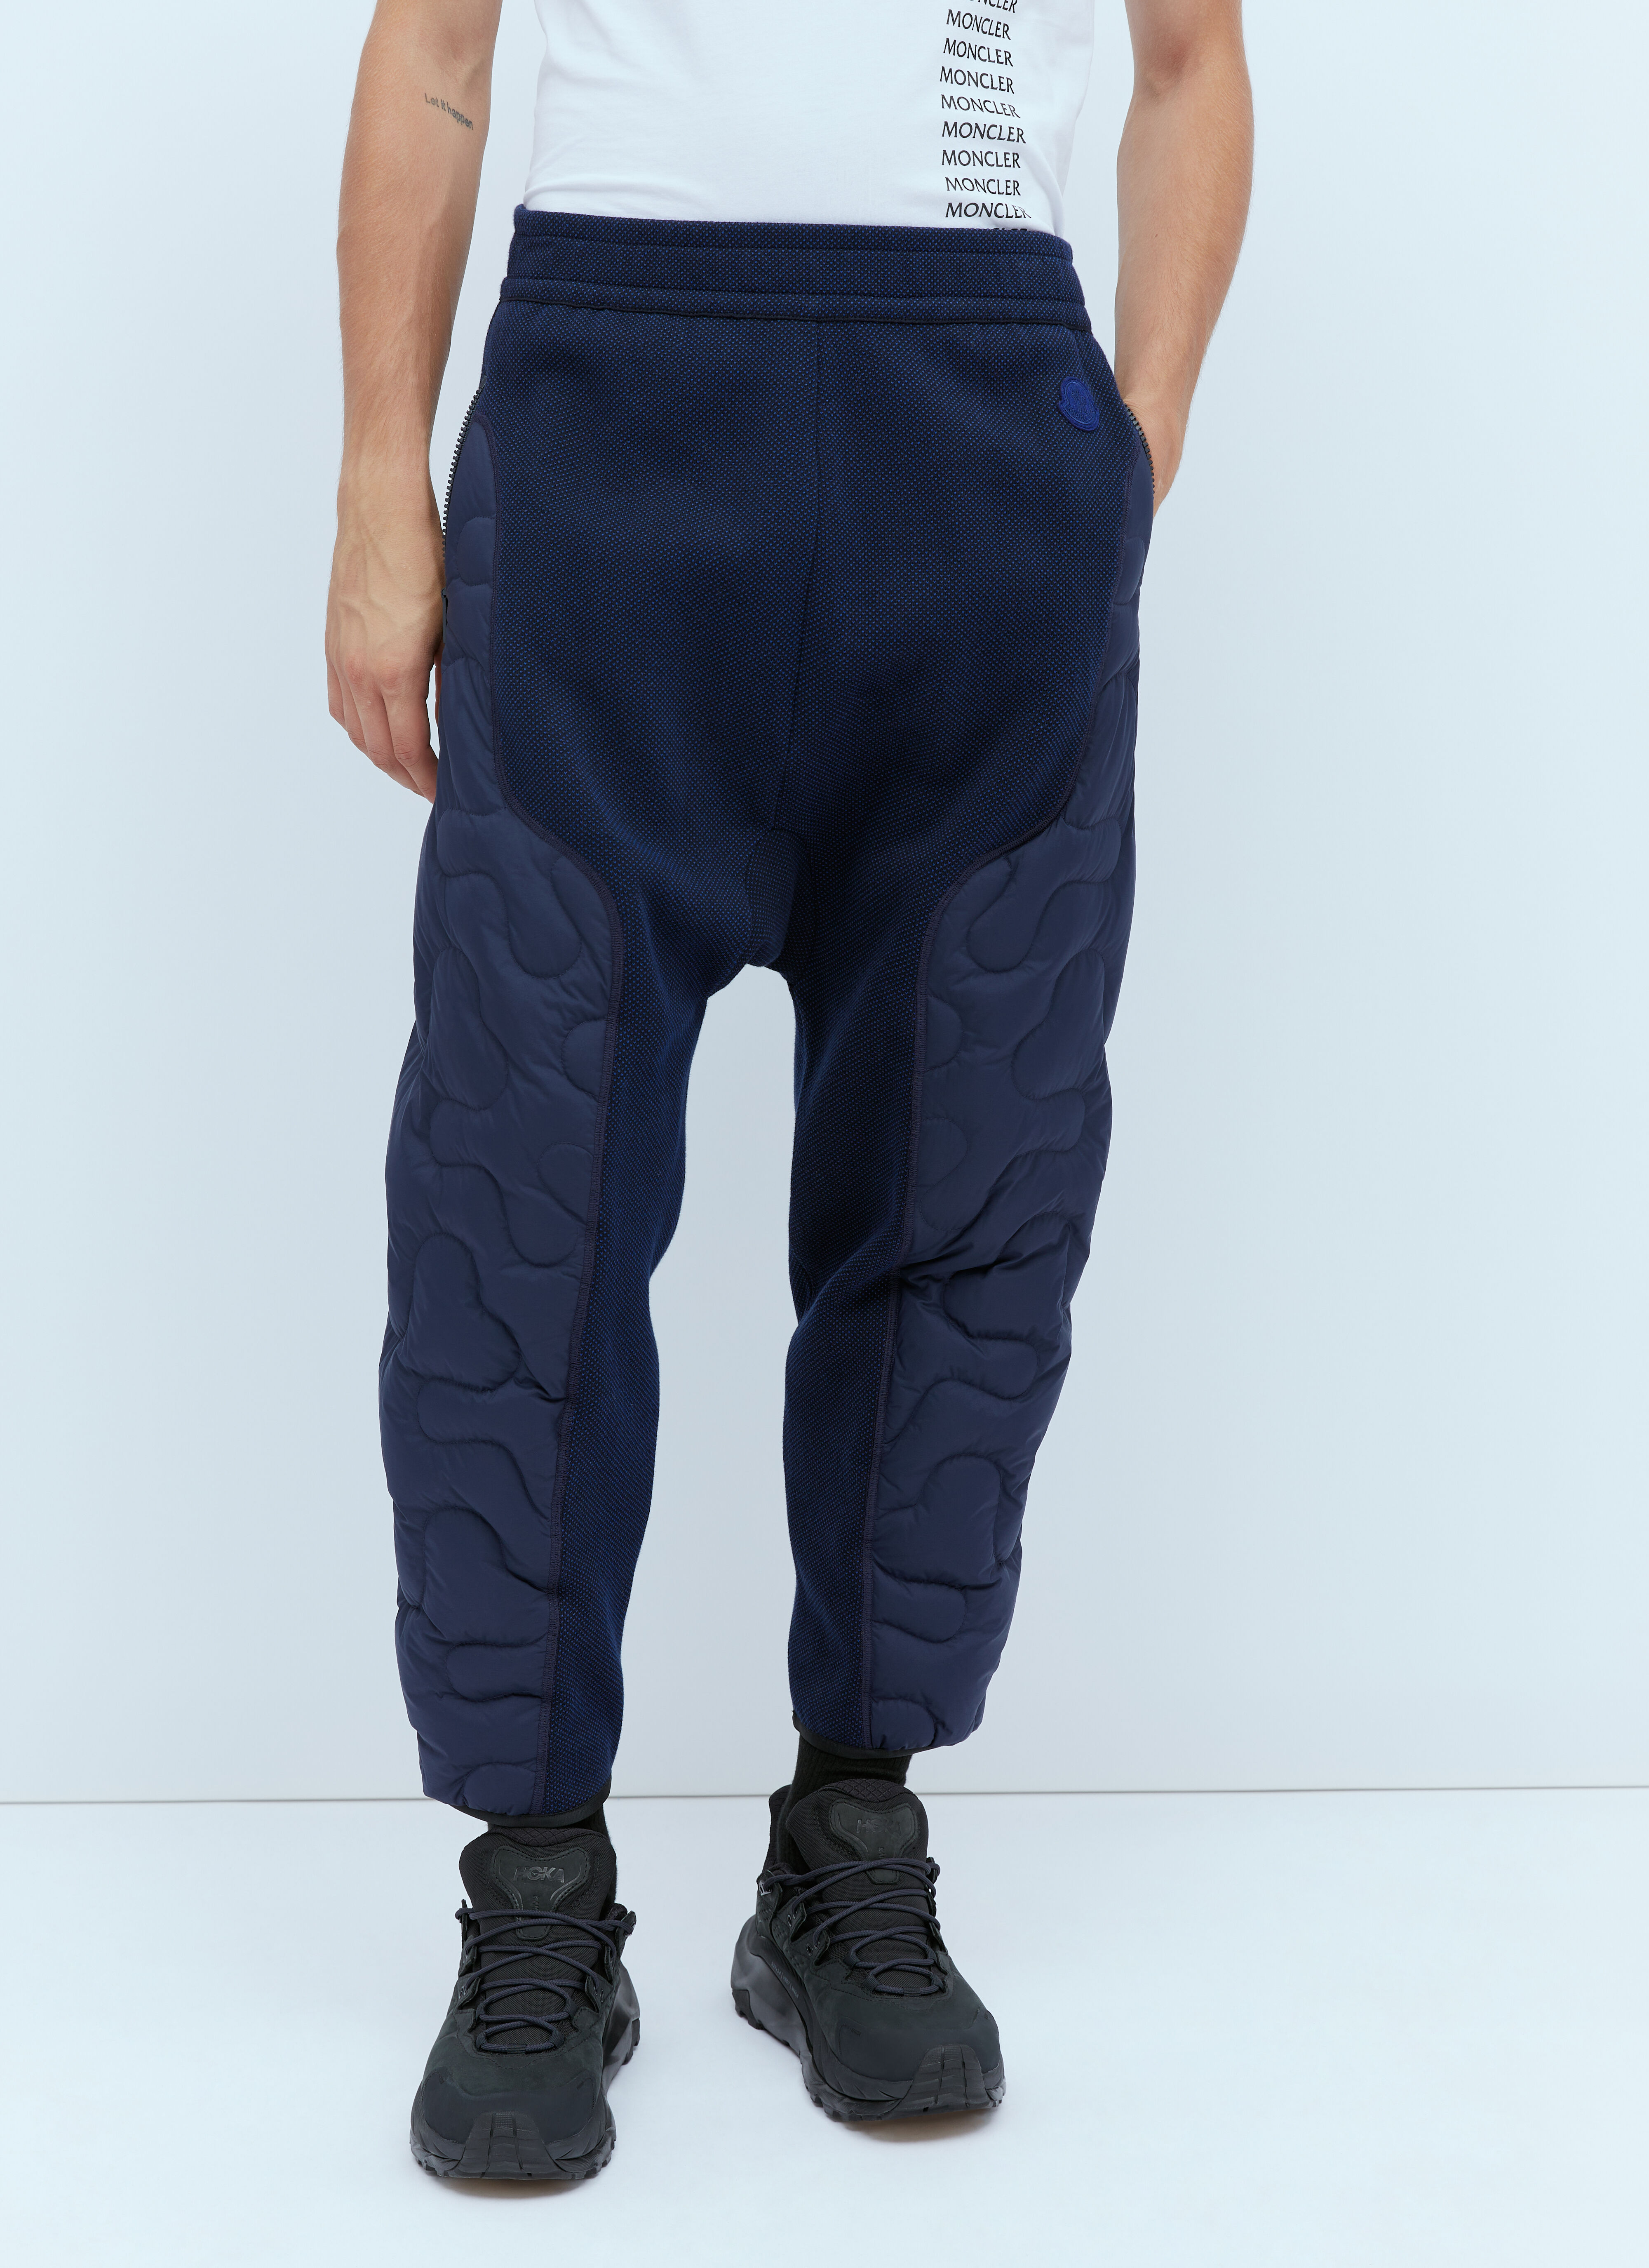 Martine Rose Padded Jersey Track Pants Blue mtr0356002